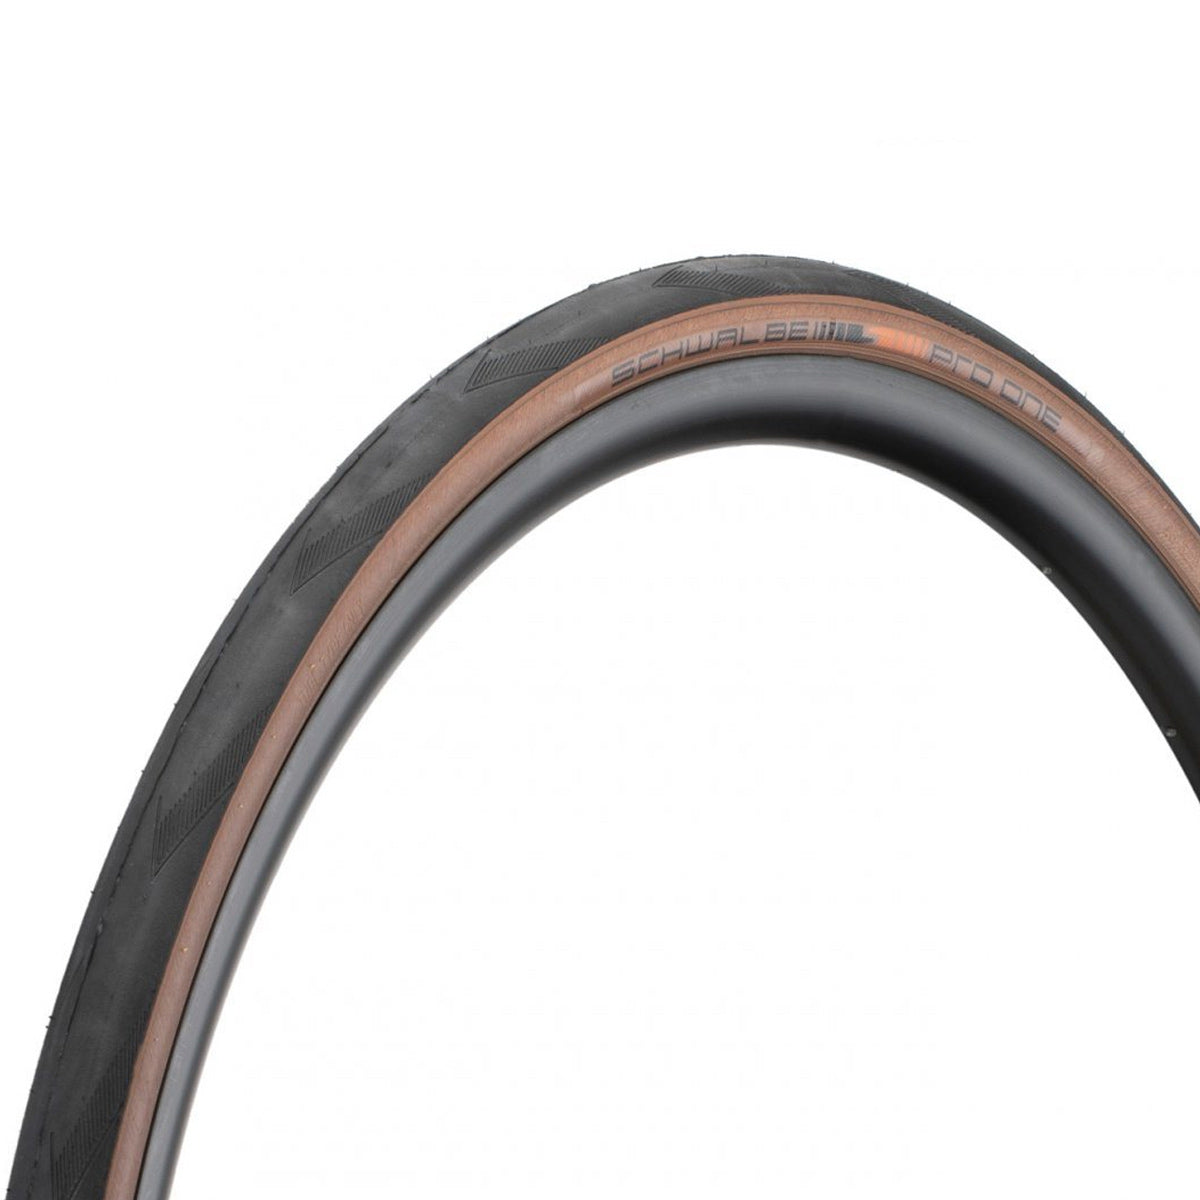 Pro One Tube Type clincher - 700x25C - Skin | All4cycling